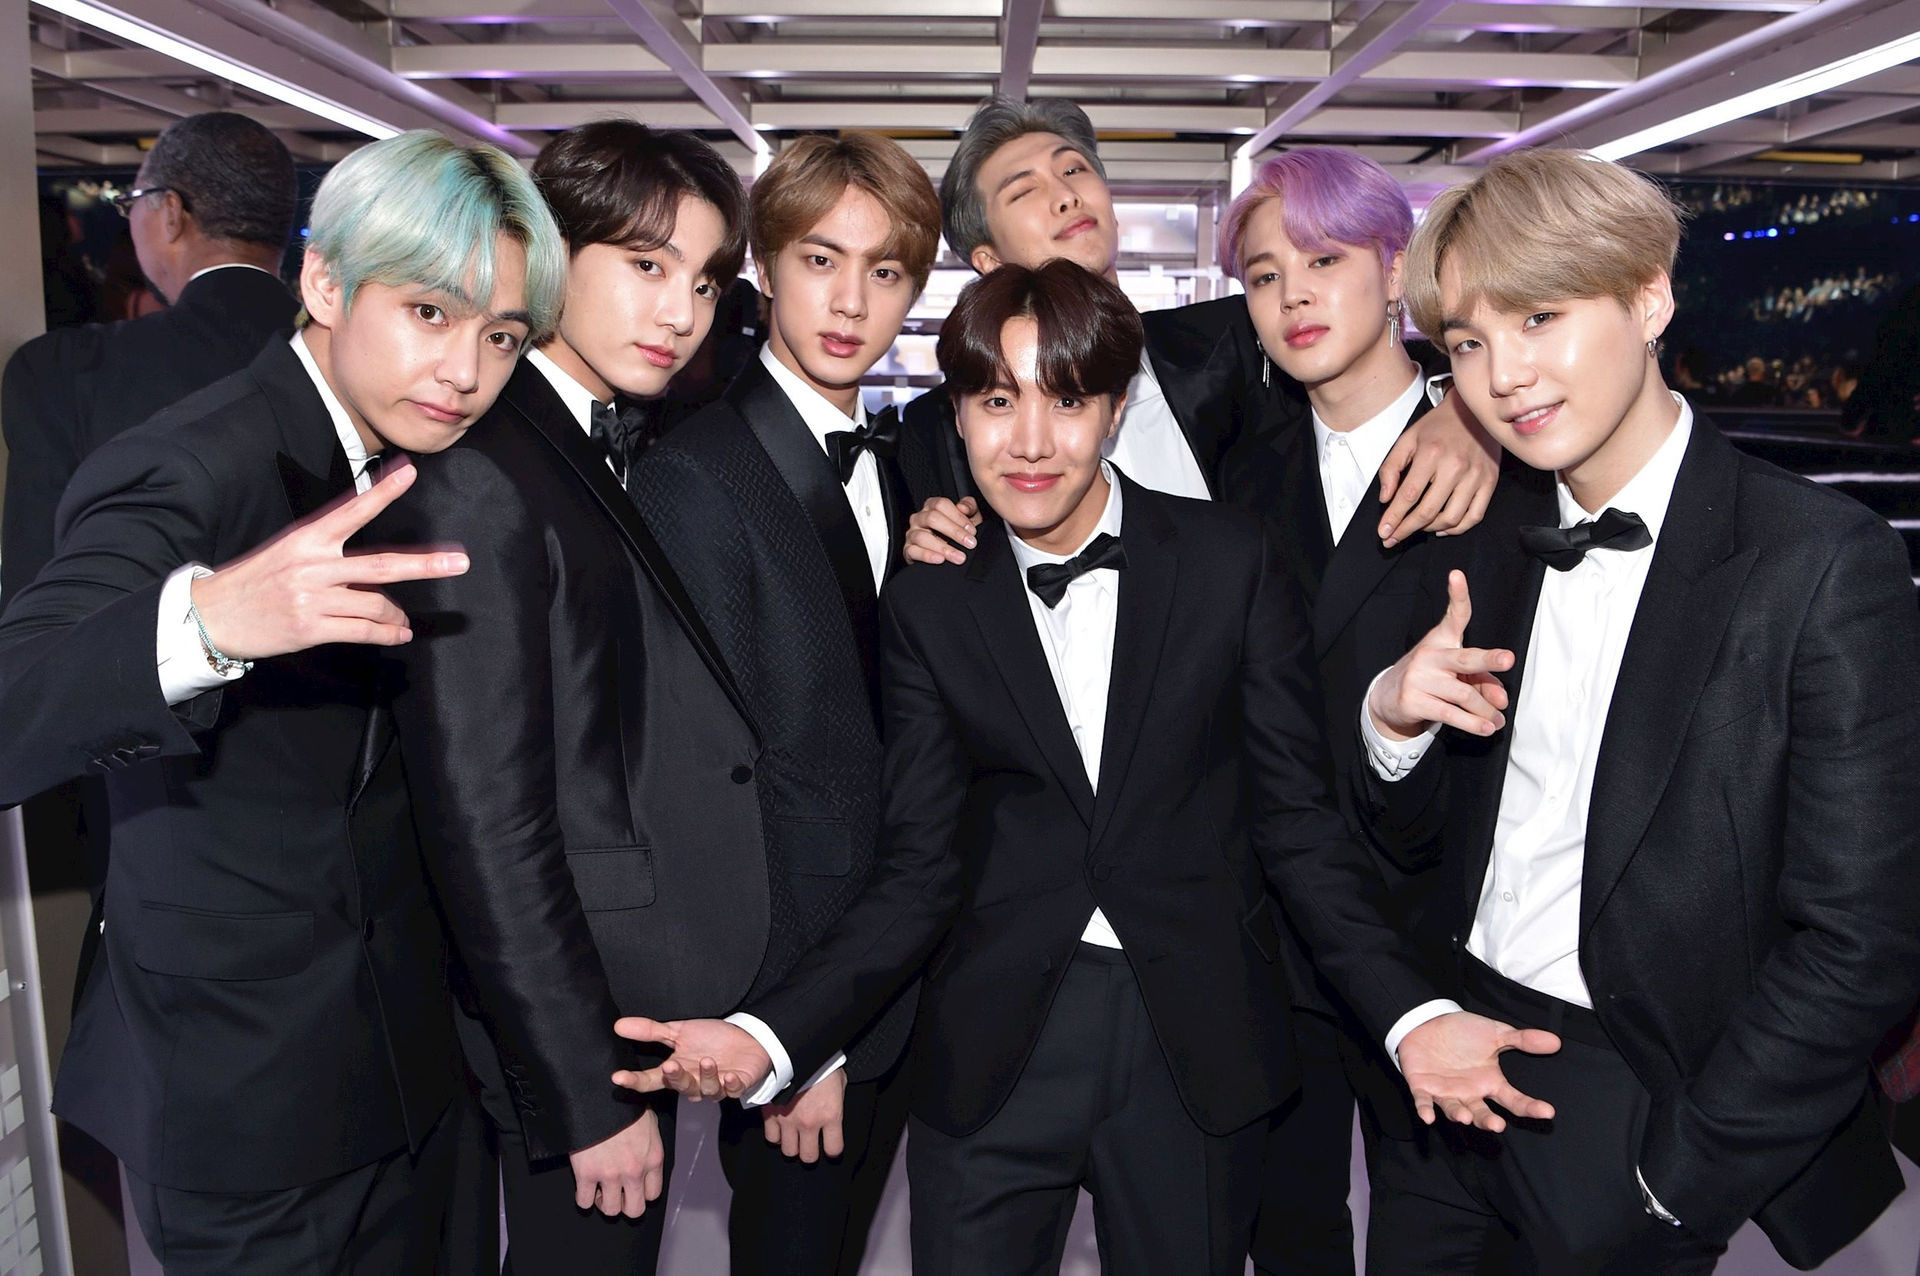 south-korean-boy-band-bts-backstage-during-the-61st-annual-news-photo-1097661412-1565598626.jpeg